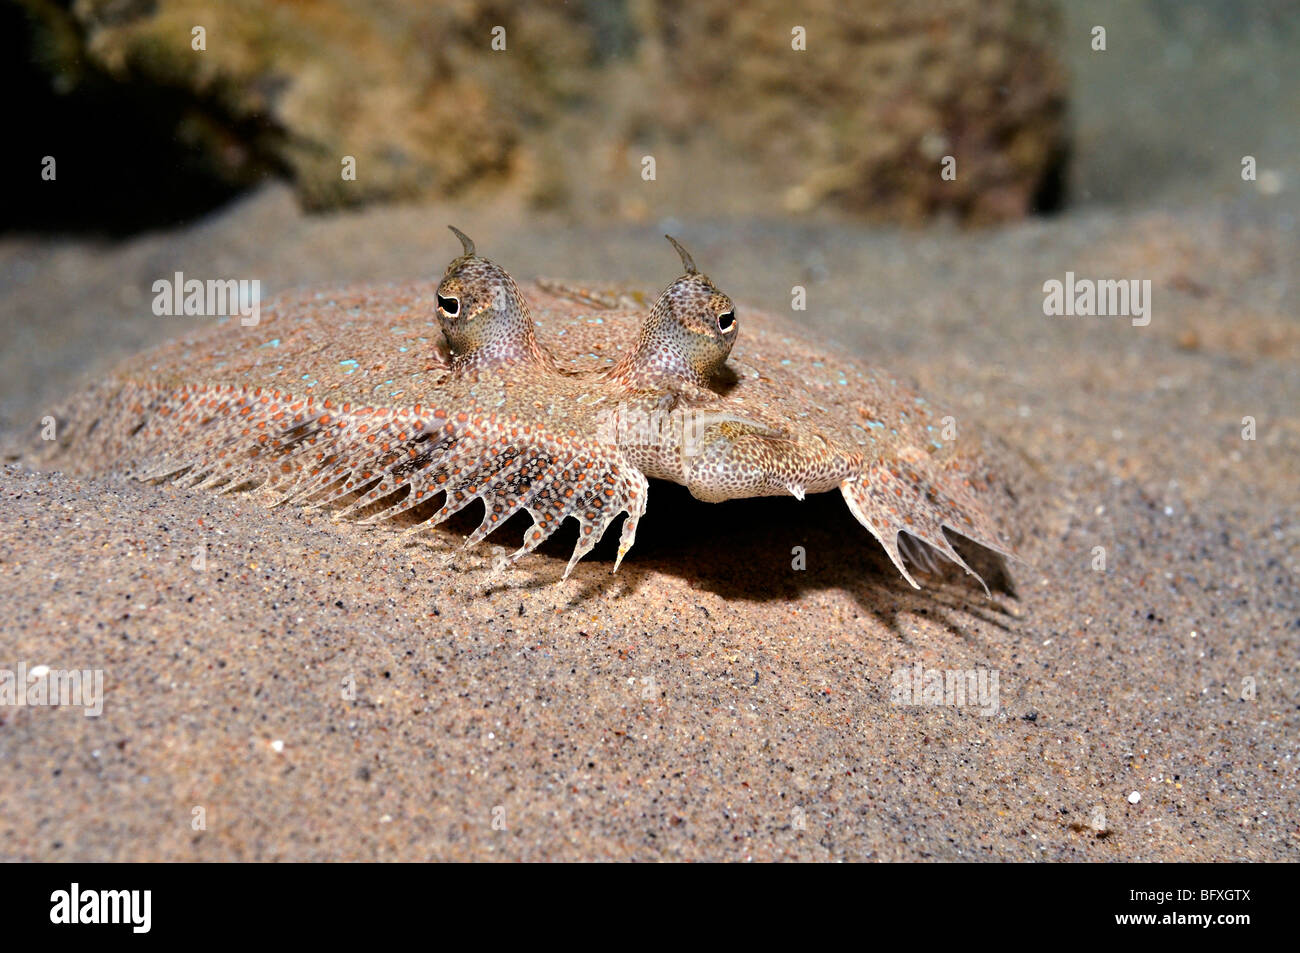 Male 'Panther flounder' fish, Bothus pantherrinus on sand, 'Red Sea' Stock Photo